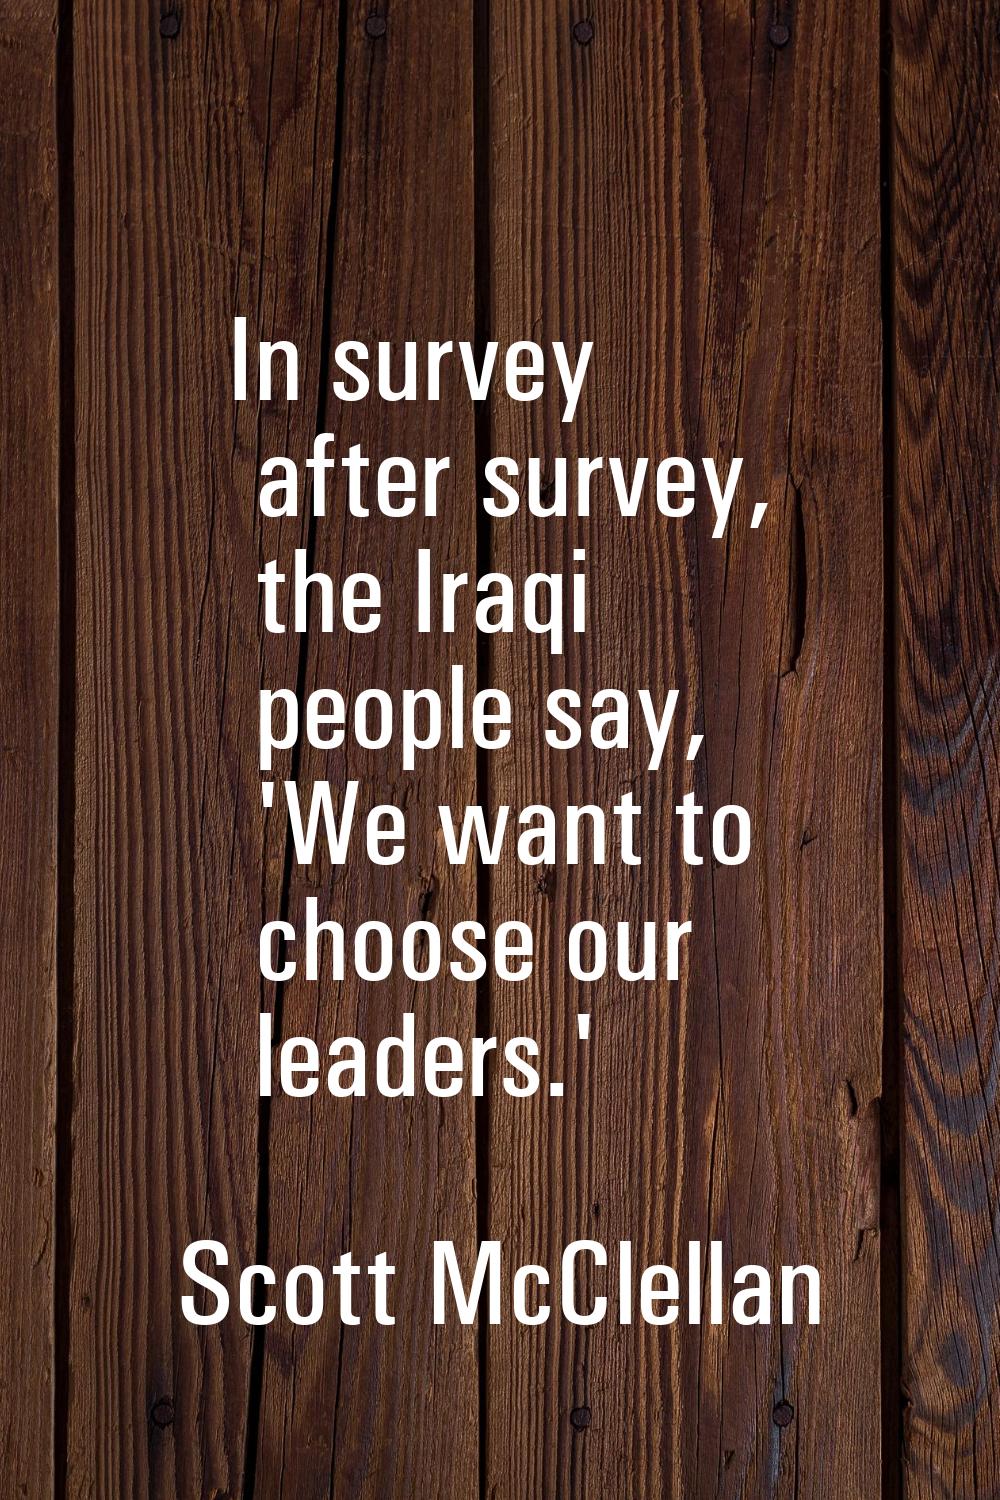 In survey after survey, the Iraqi people say, 'We want to choose our leaders.'